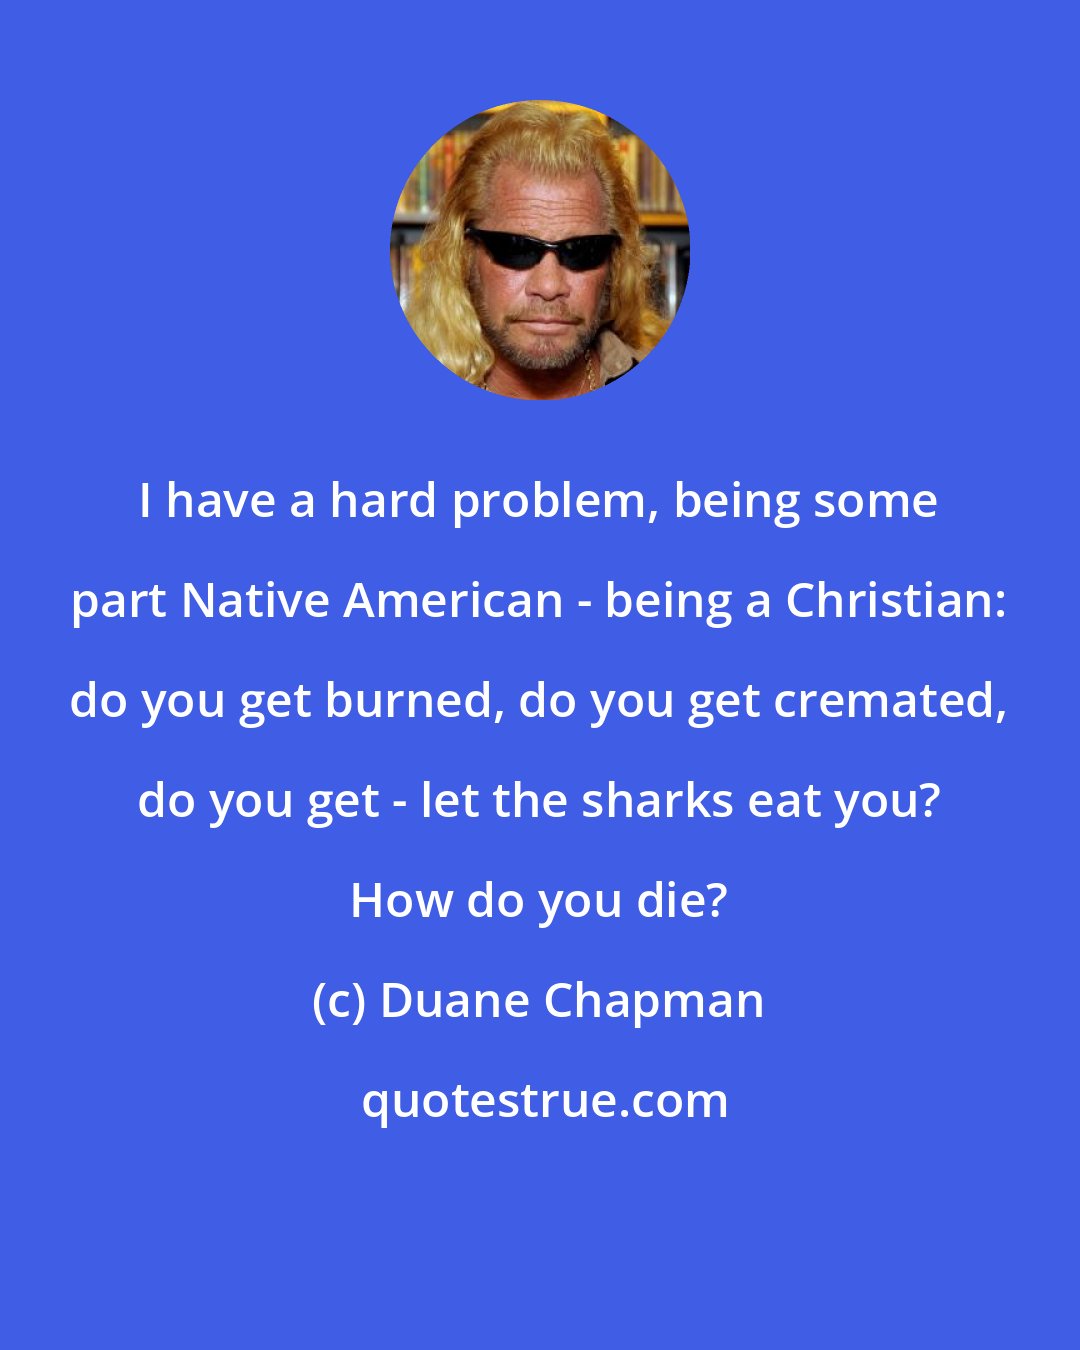 Duane Chapman: I have a hard problem, being some part Native American - being a Christian: do you get burned, do you get cremated, do you get - let the sharks eat you? How do you die?